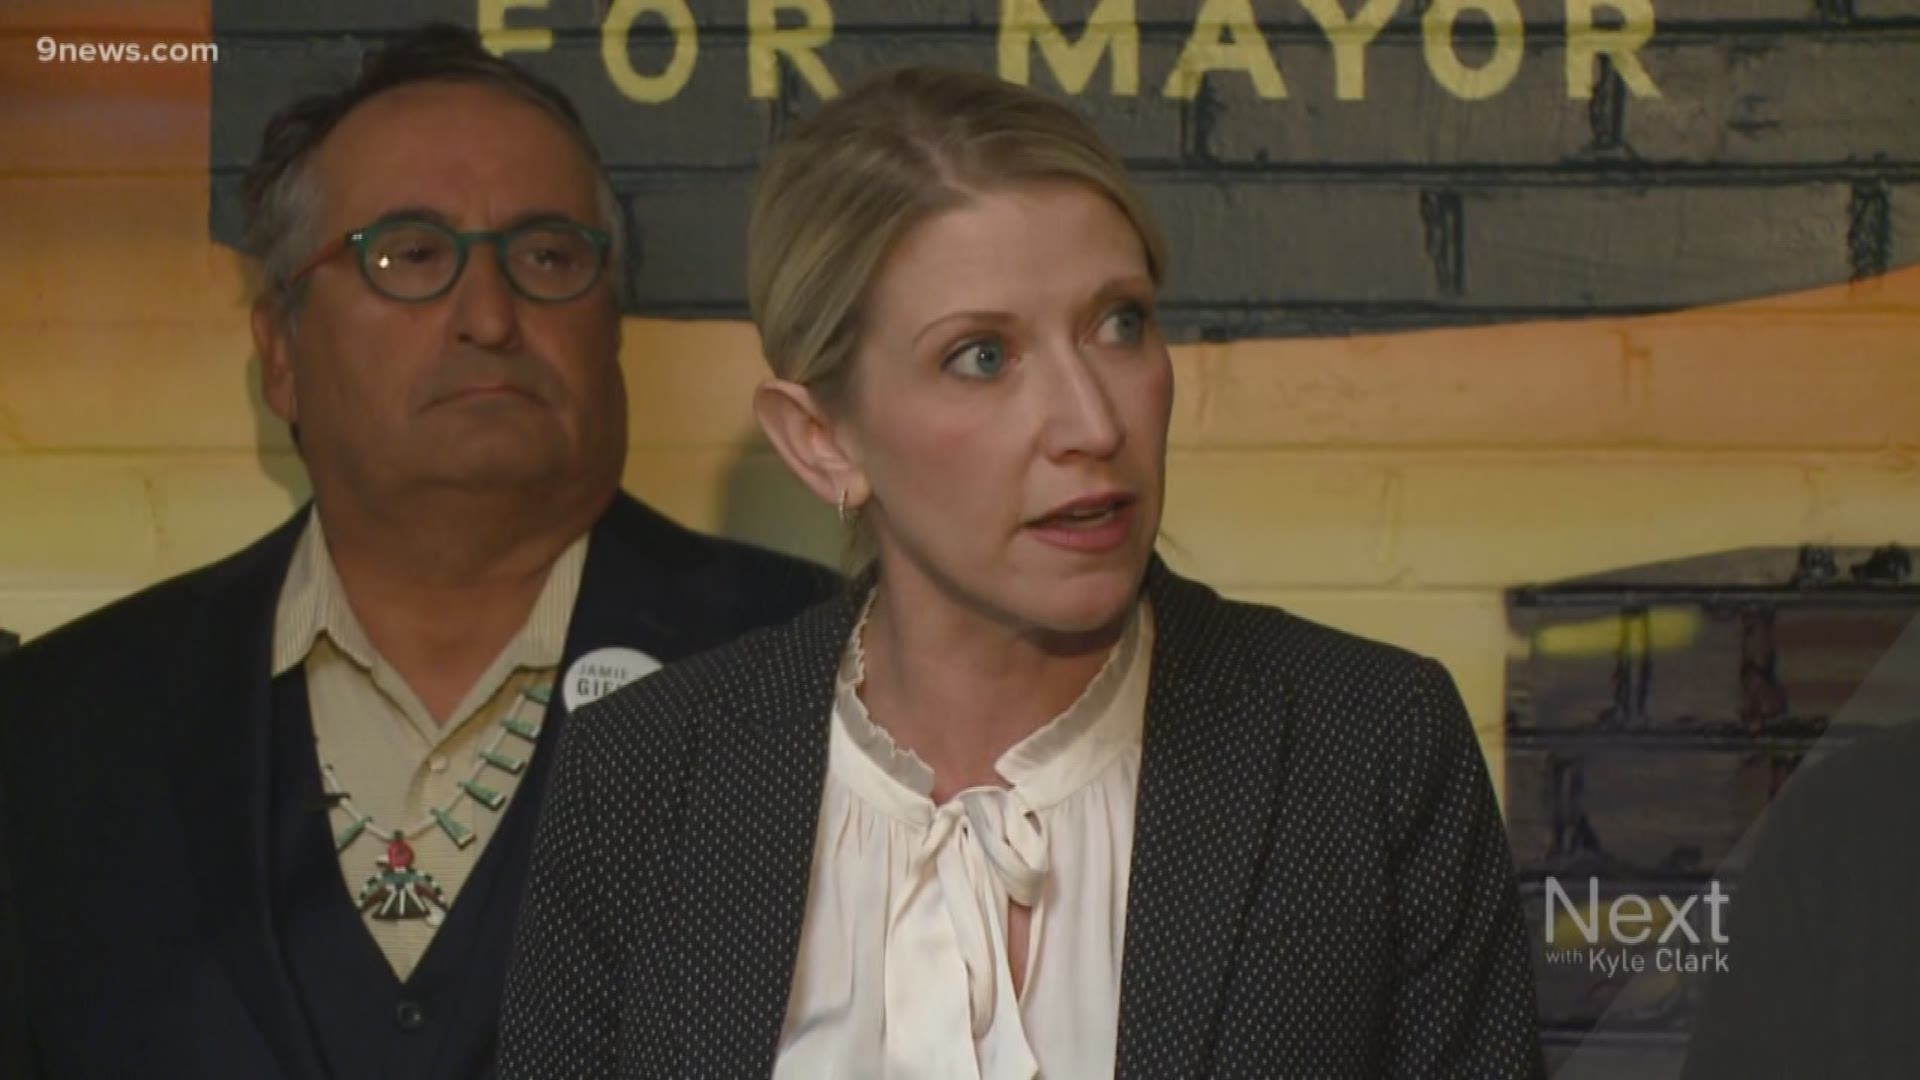 Mayoral challenger Jamie Giellis said in a press conference that her opponent, incumbent Michael Hancock, created a culture of sexual harassment.